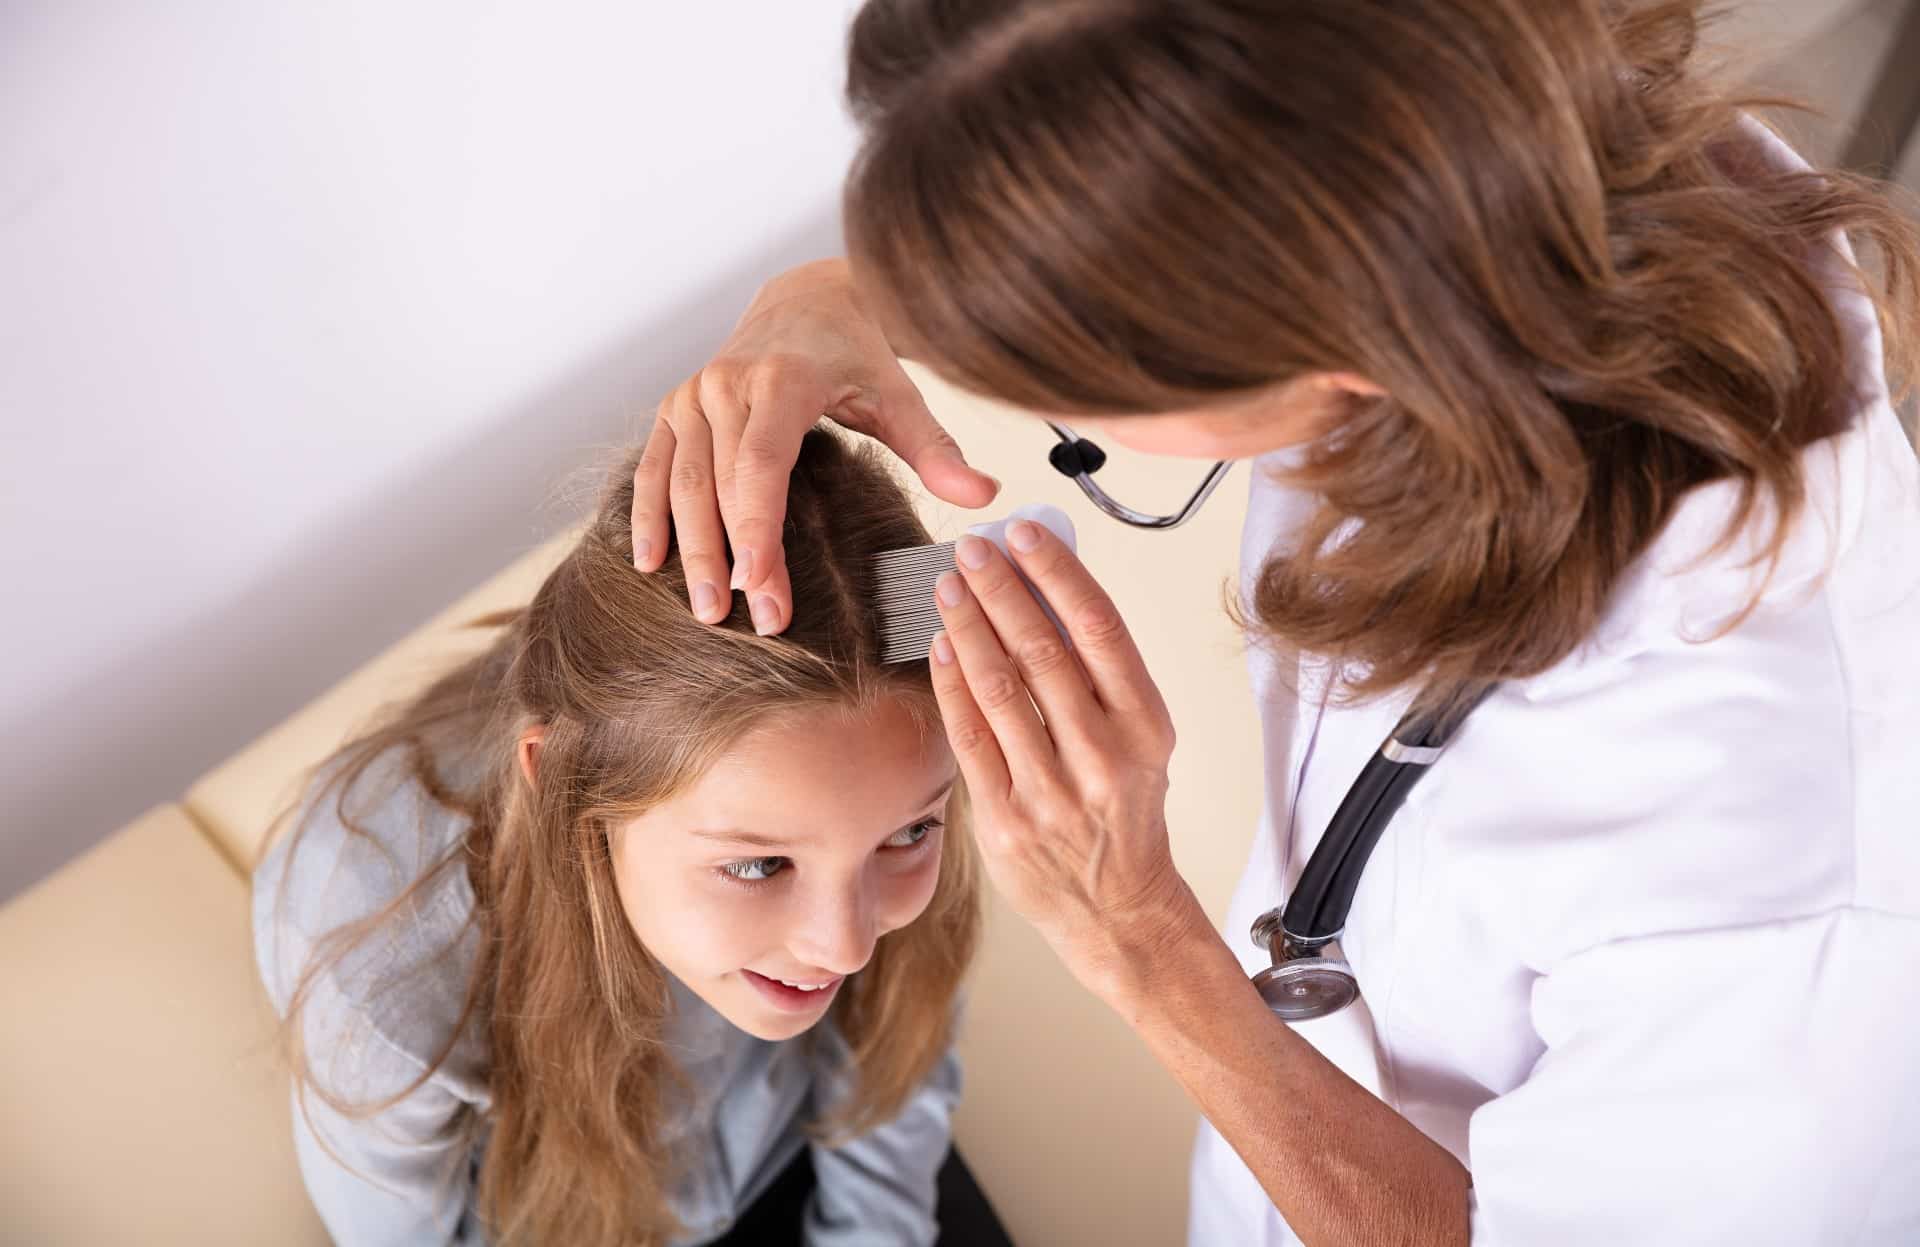 Lice Can Be a “Super Big” Problem this Time of Year